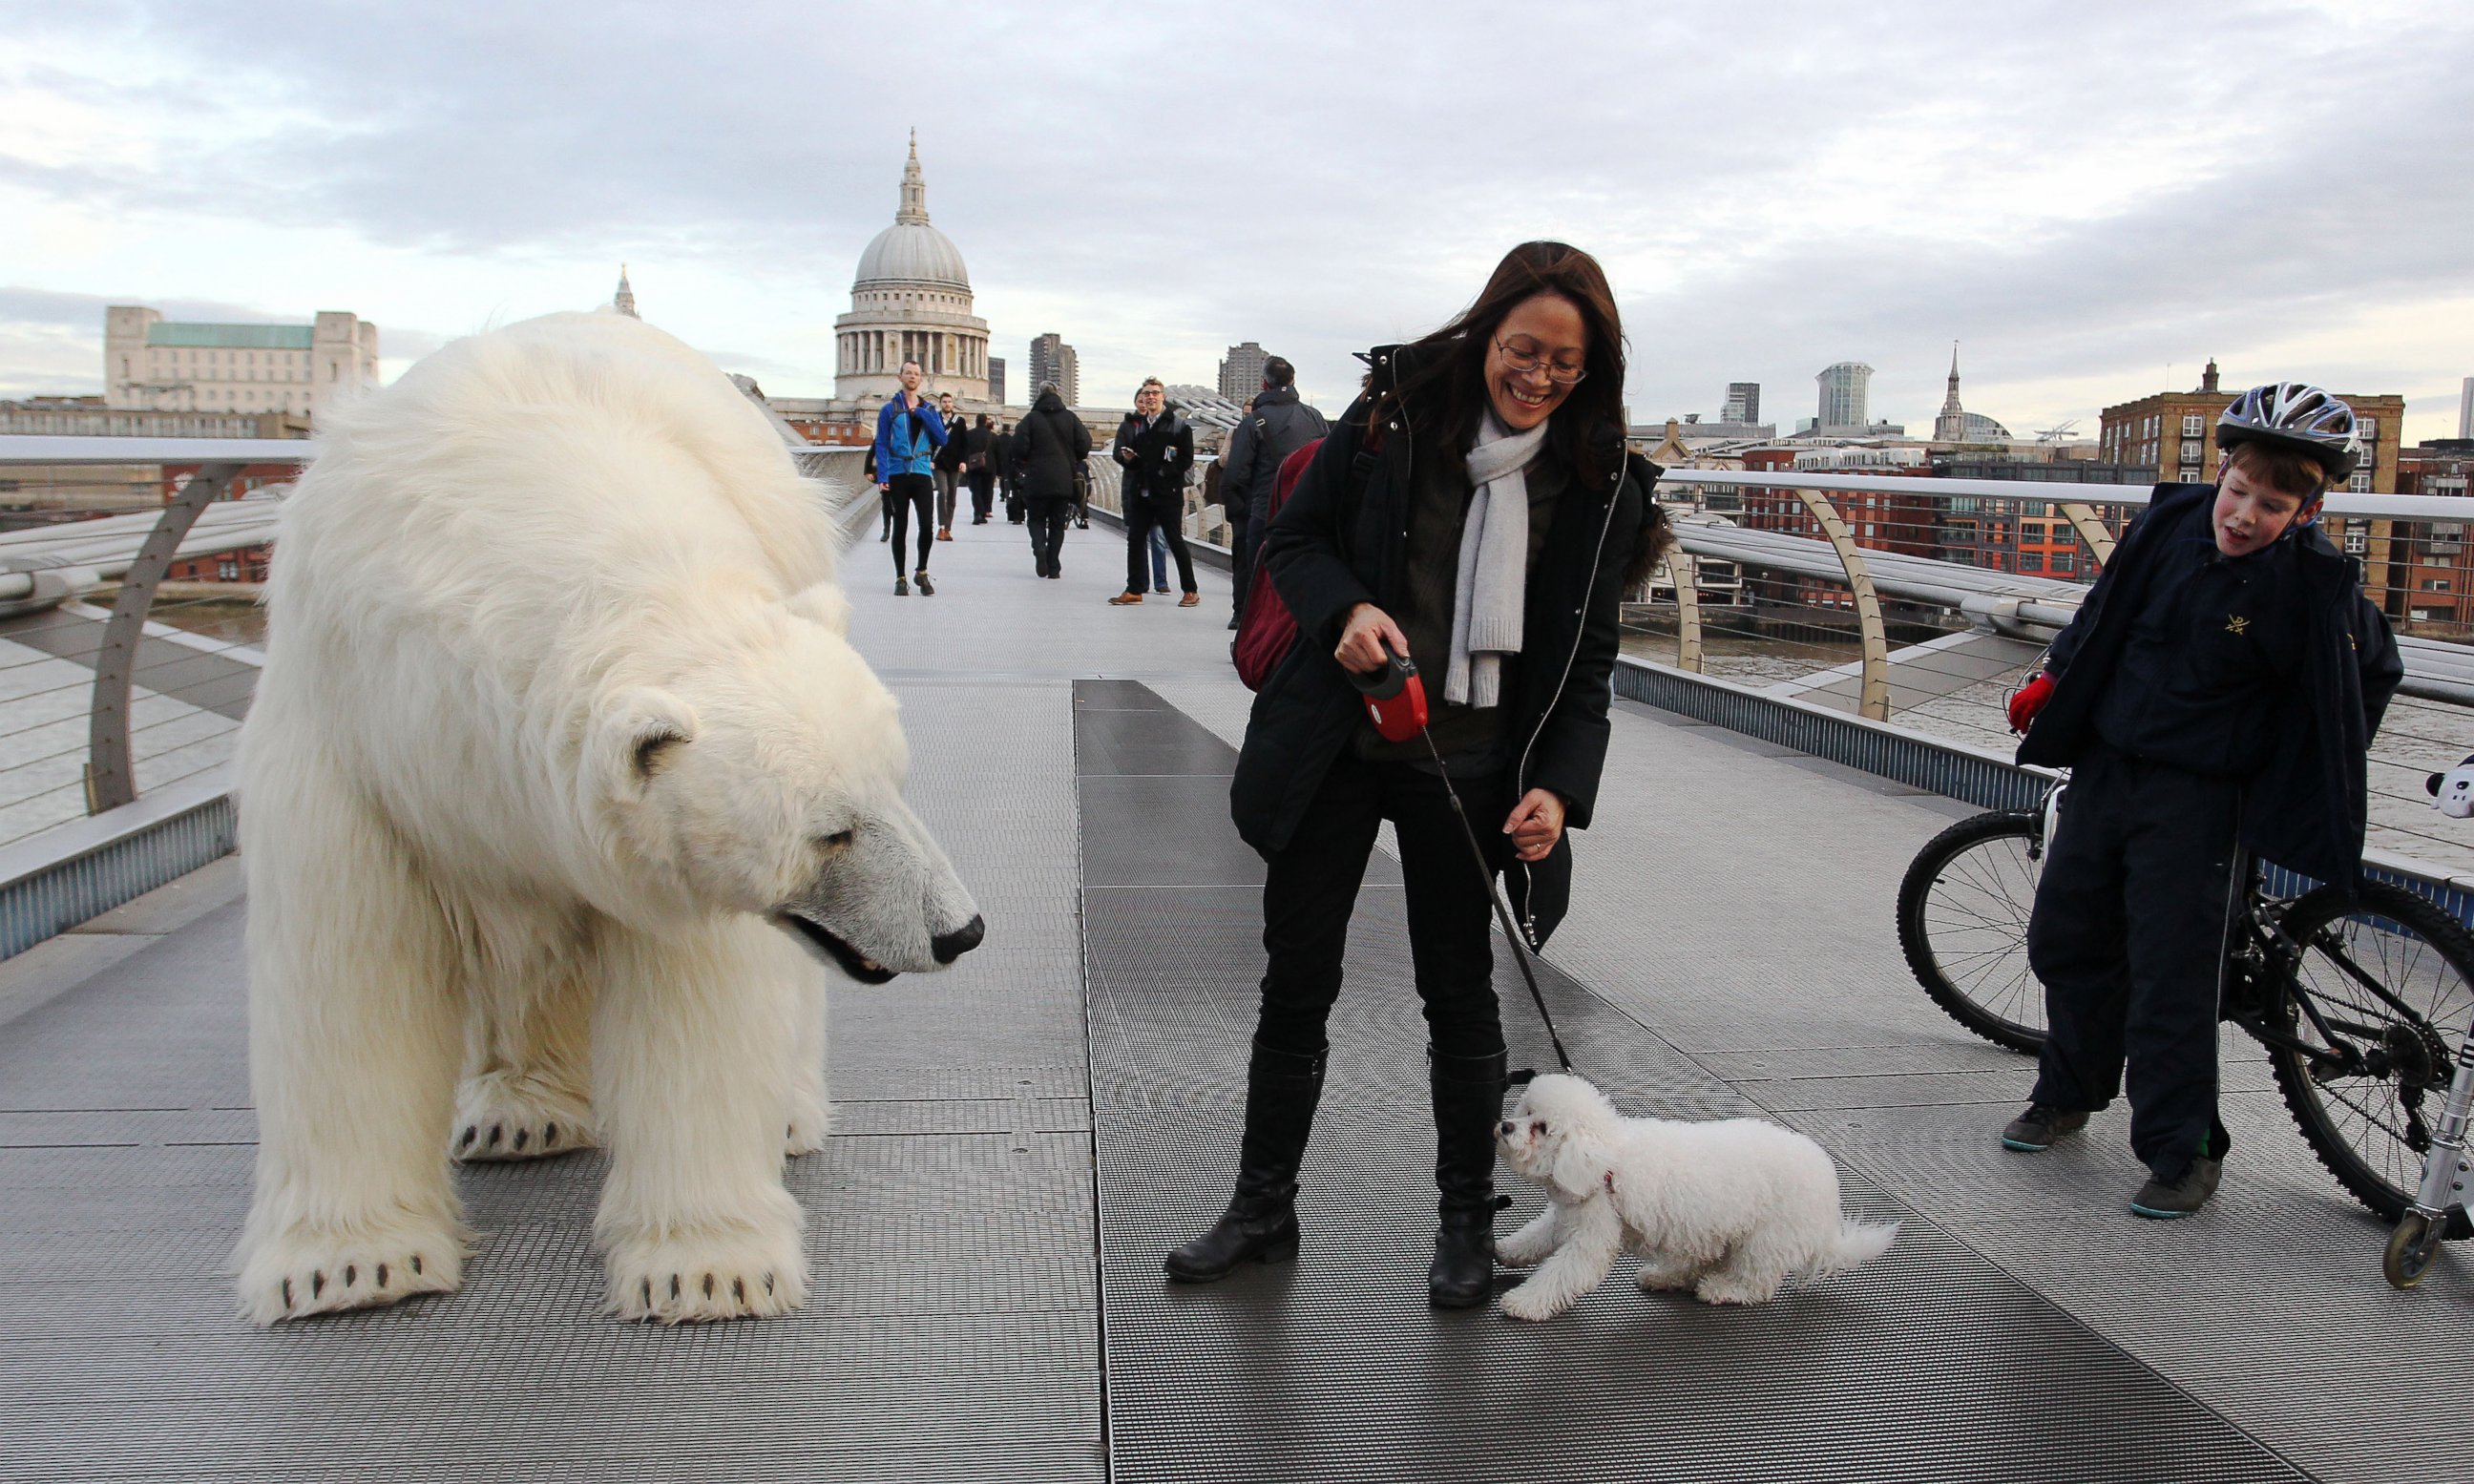 PHOTO: An 8 ft long, fully animated adult male polar bear was unleashed on the freezing streets of London to mark the launch of Sky Atlantic's hotly anticipated arctic crime drama Fortitude, Jan. 27, 2015.